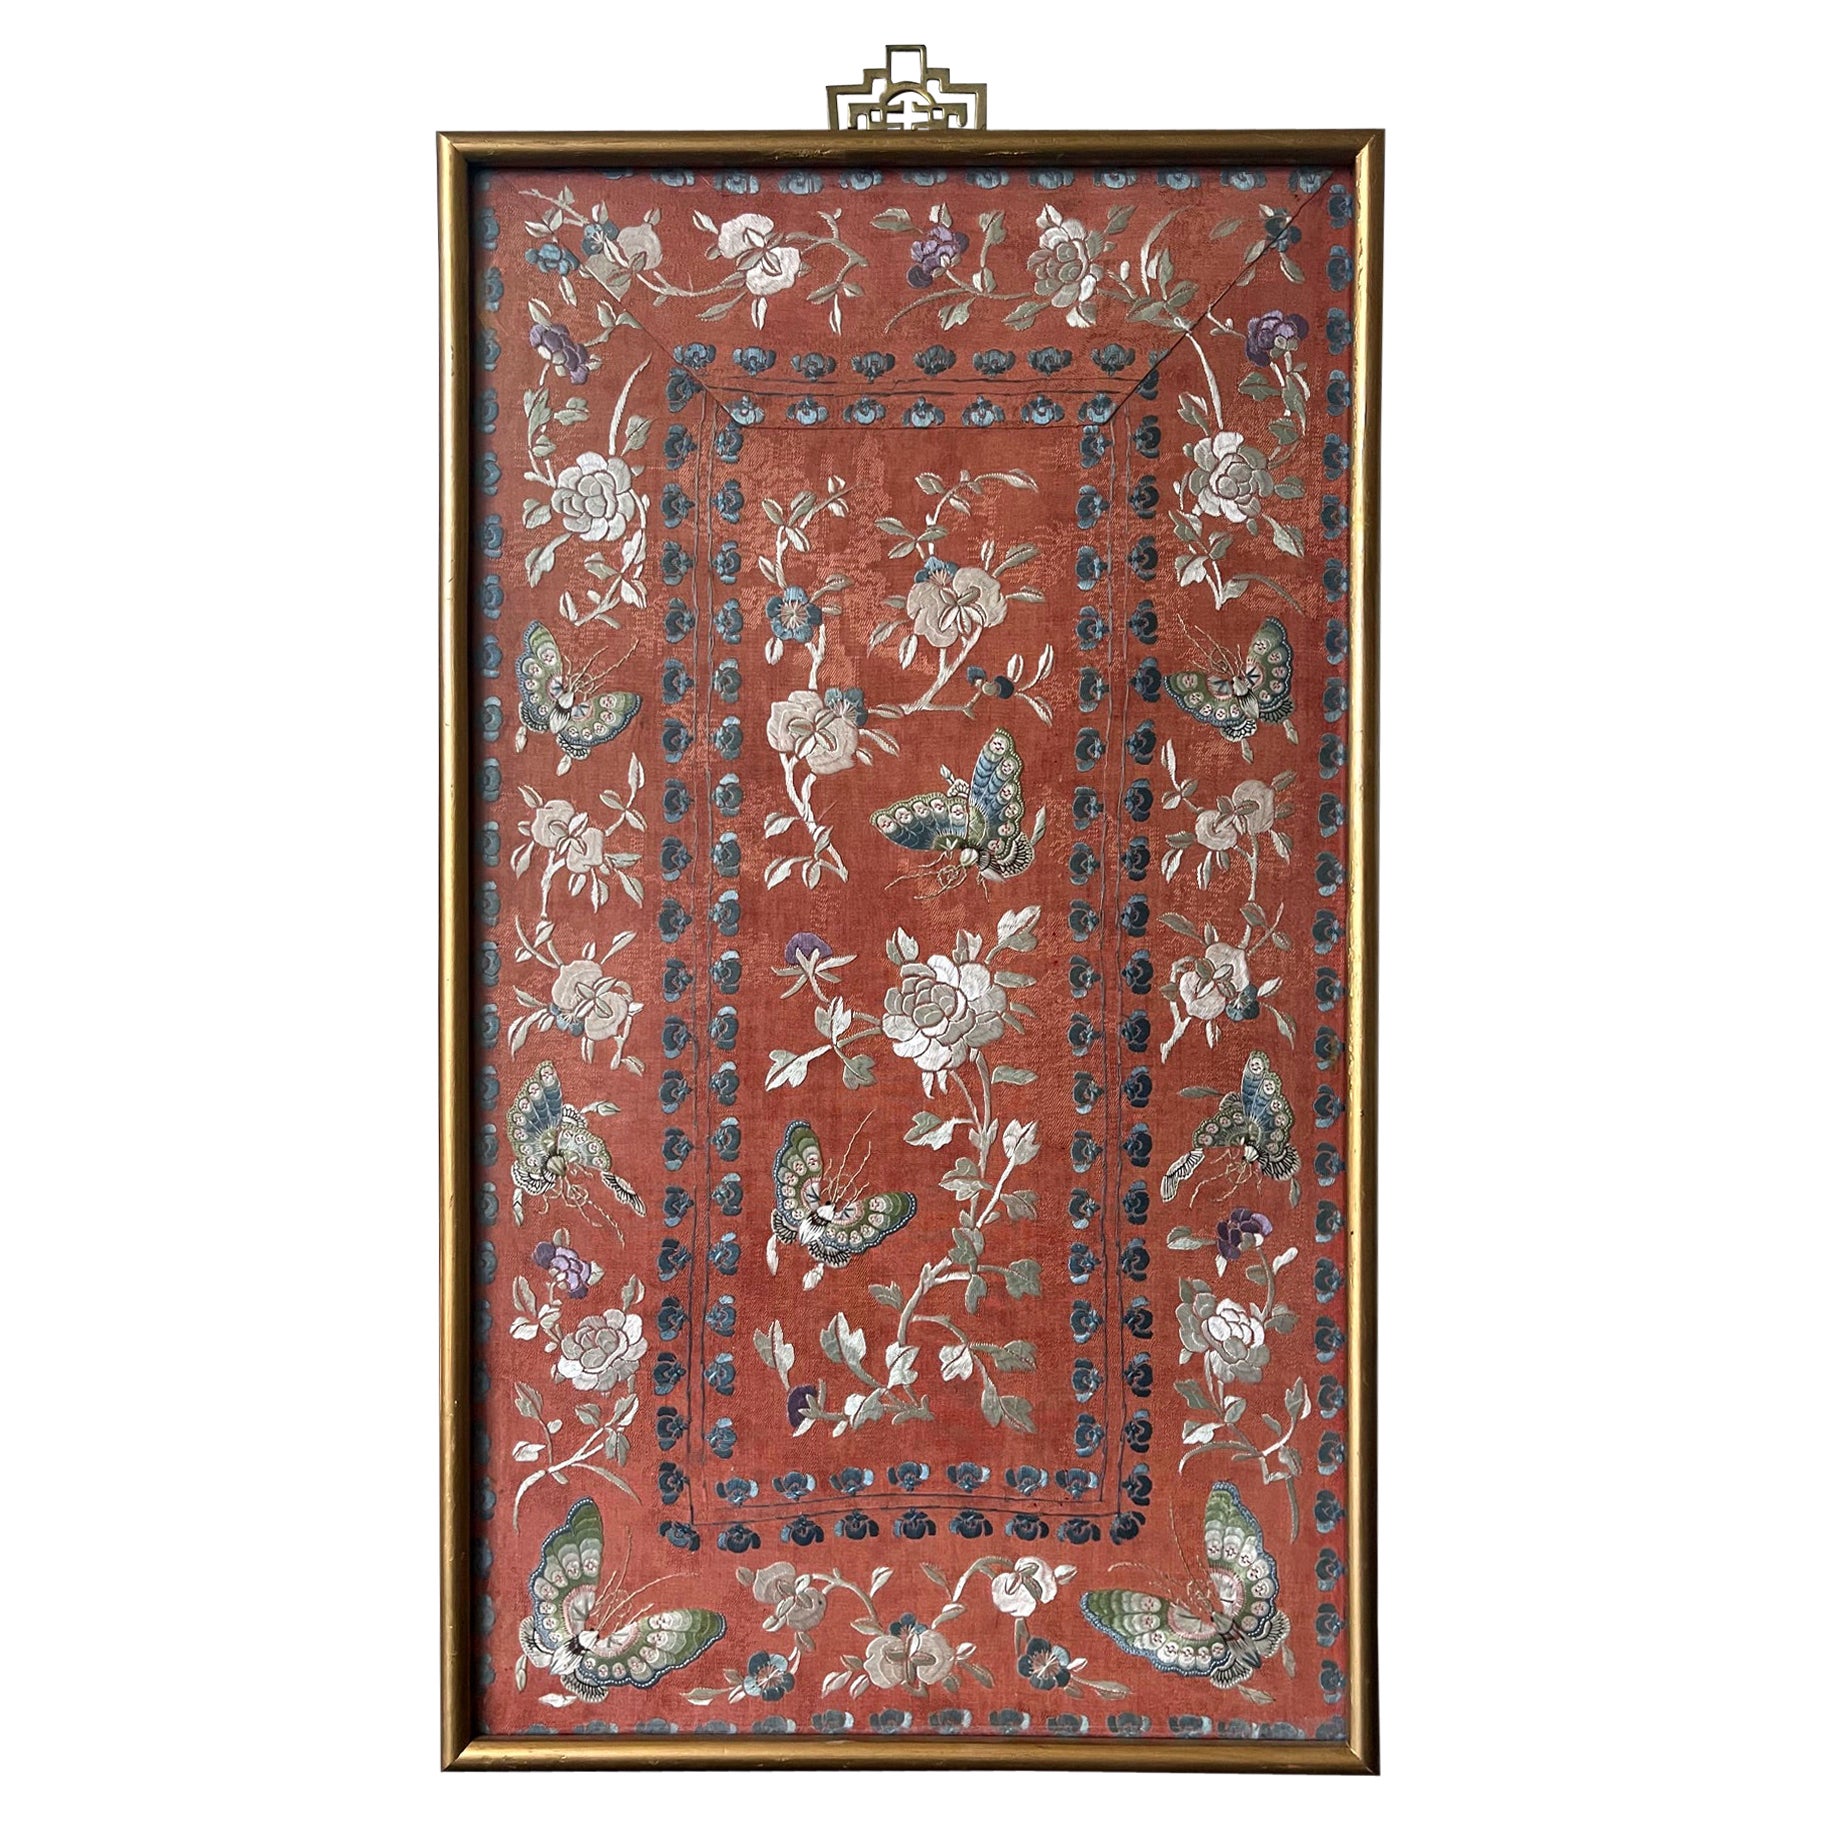 Exhibited Framed Fine Chinese Embroidery Silk Panel Qing Dynasty For Sale